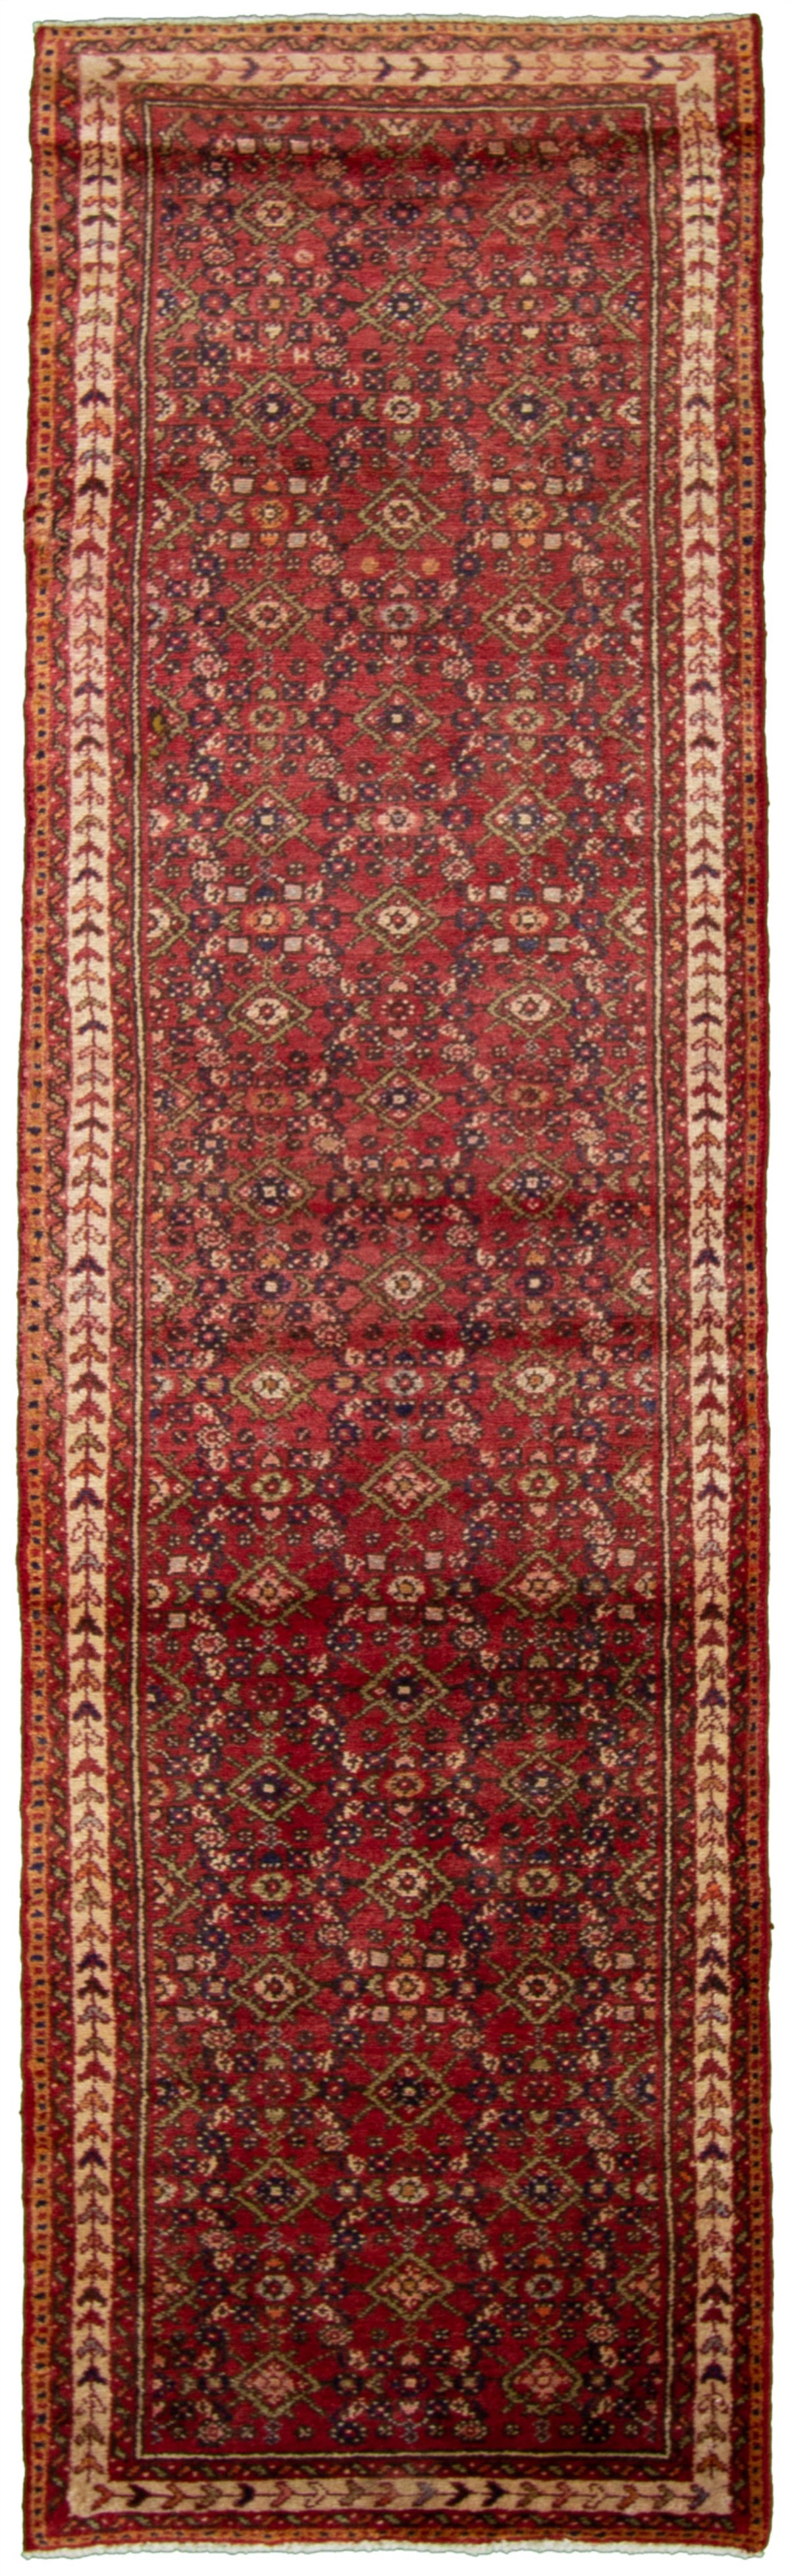 Hand-knotted Hosseinabad Red Wool Rug 2'6" x 9'5"  Size: 2'6" x 9'5"  